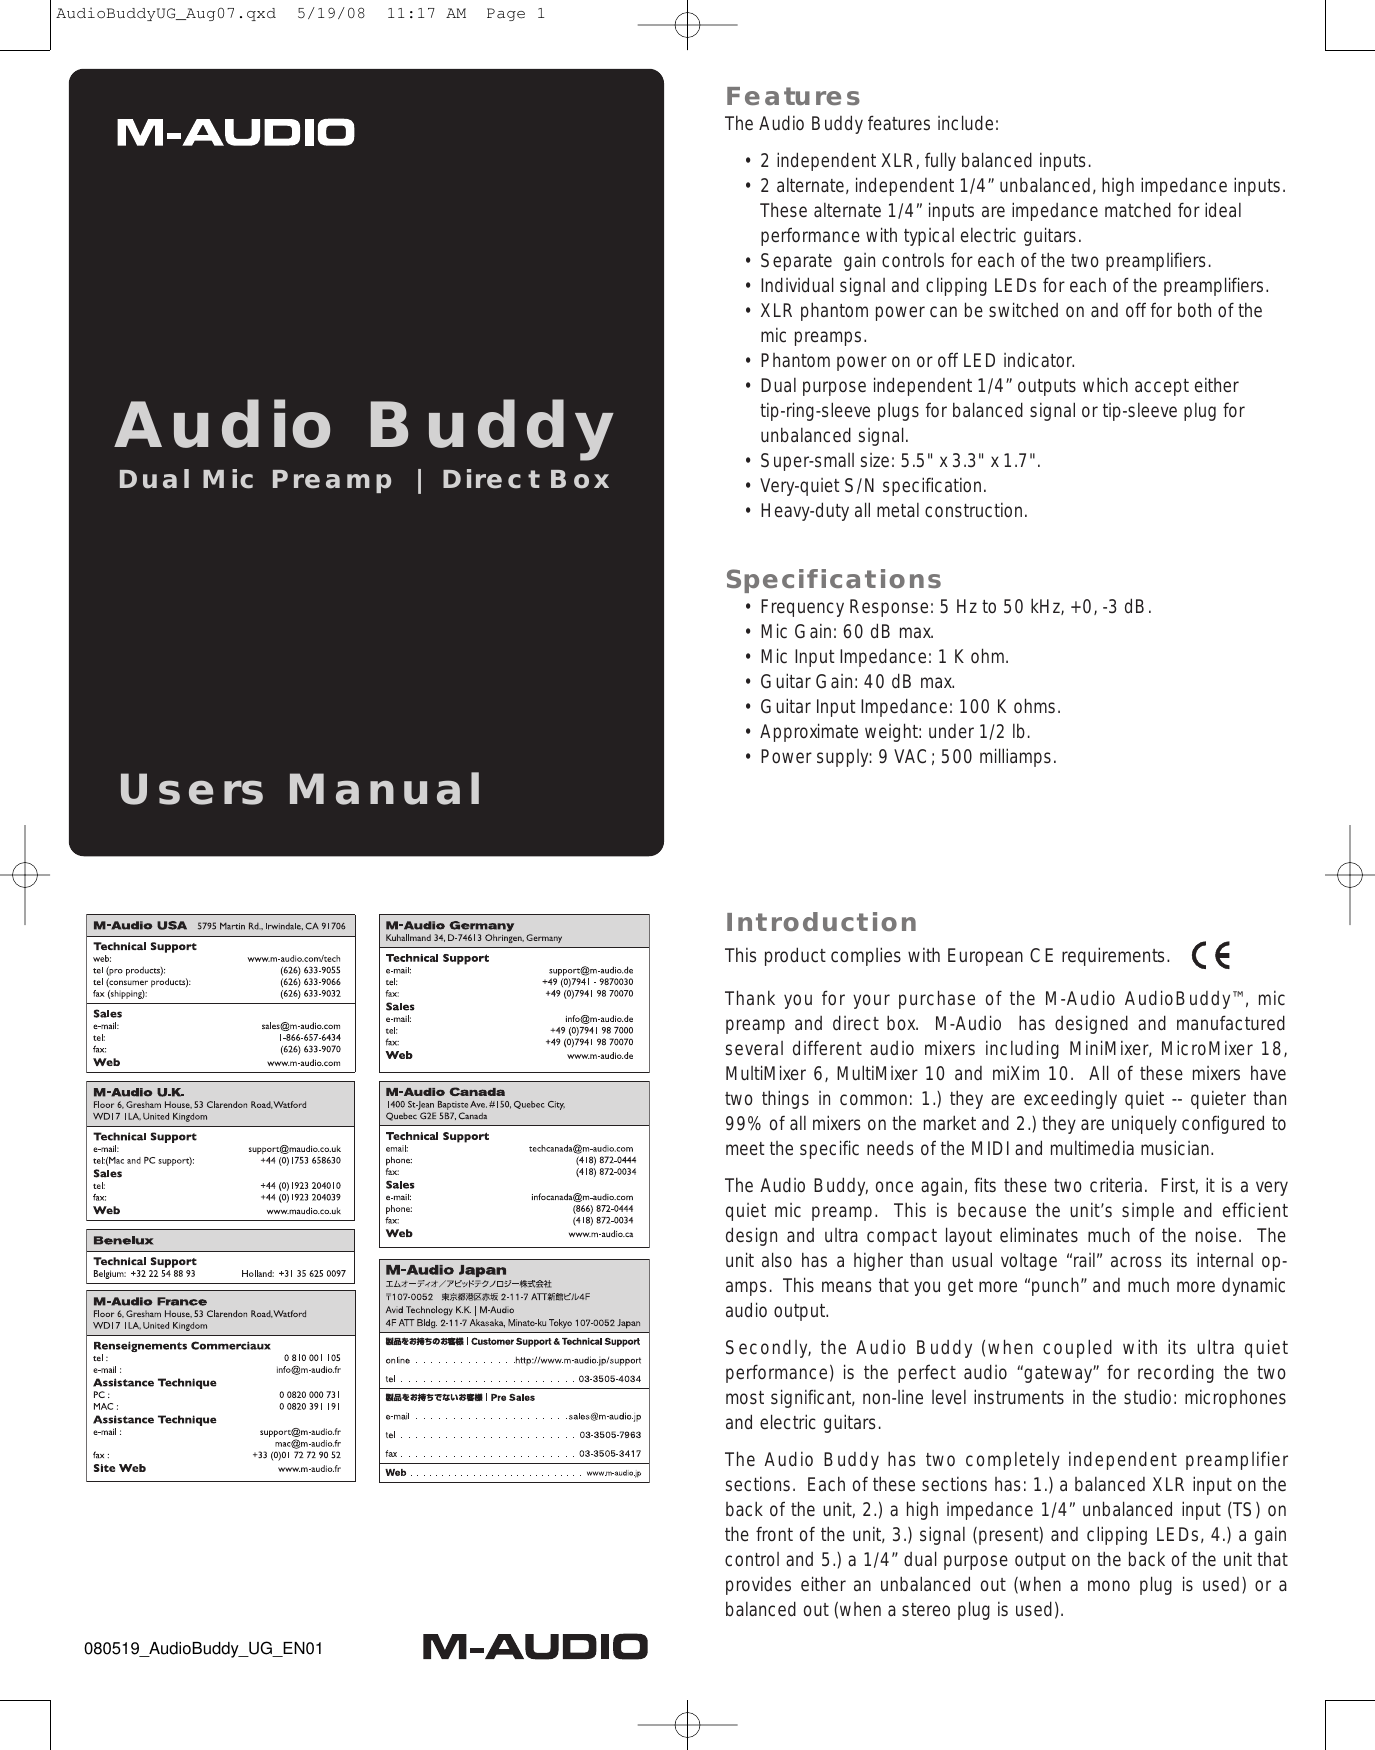 Page 8 of 8 - M-Audio M-Audio-Audio-Buddy-Dual-Mic-Preamp-Users-Manual- Audio Buddy User Guide  M-audio-audio-buddy-dual-mic-preamp-users-manual